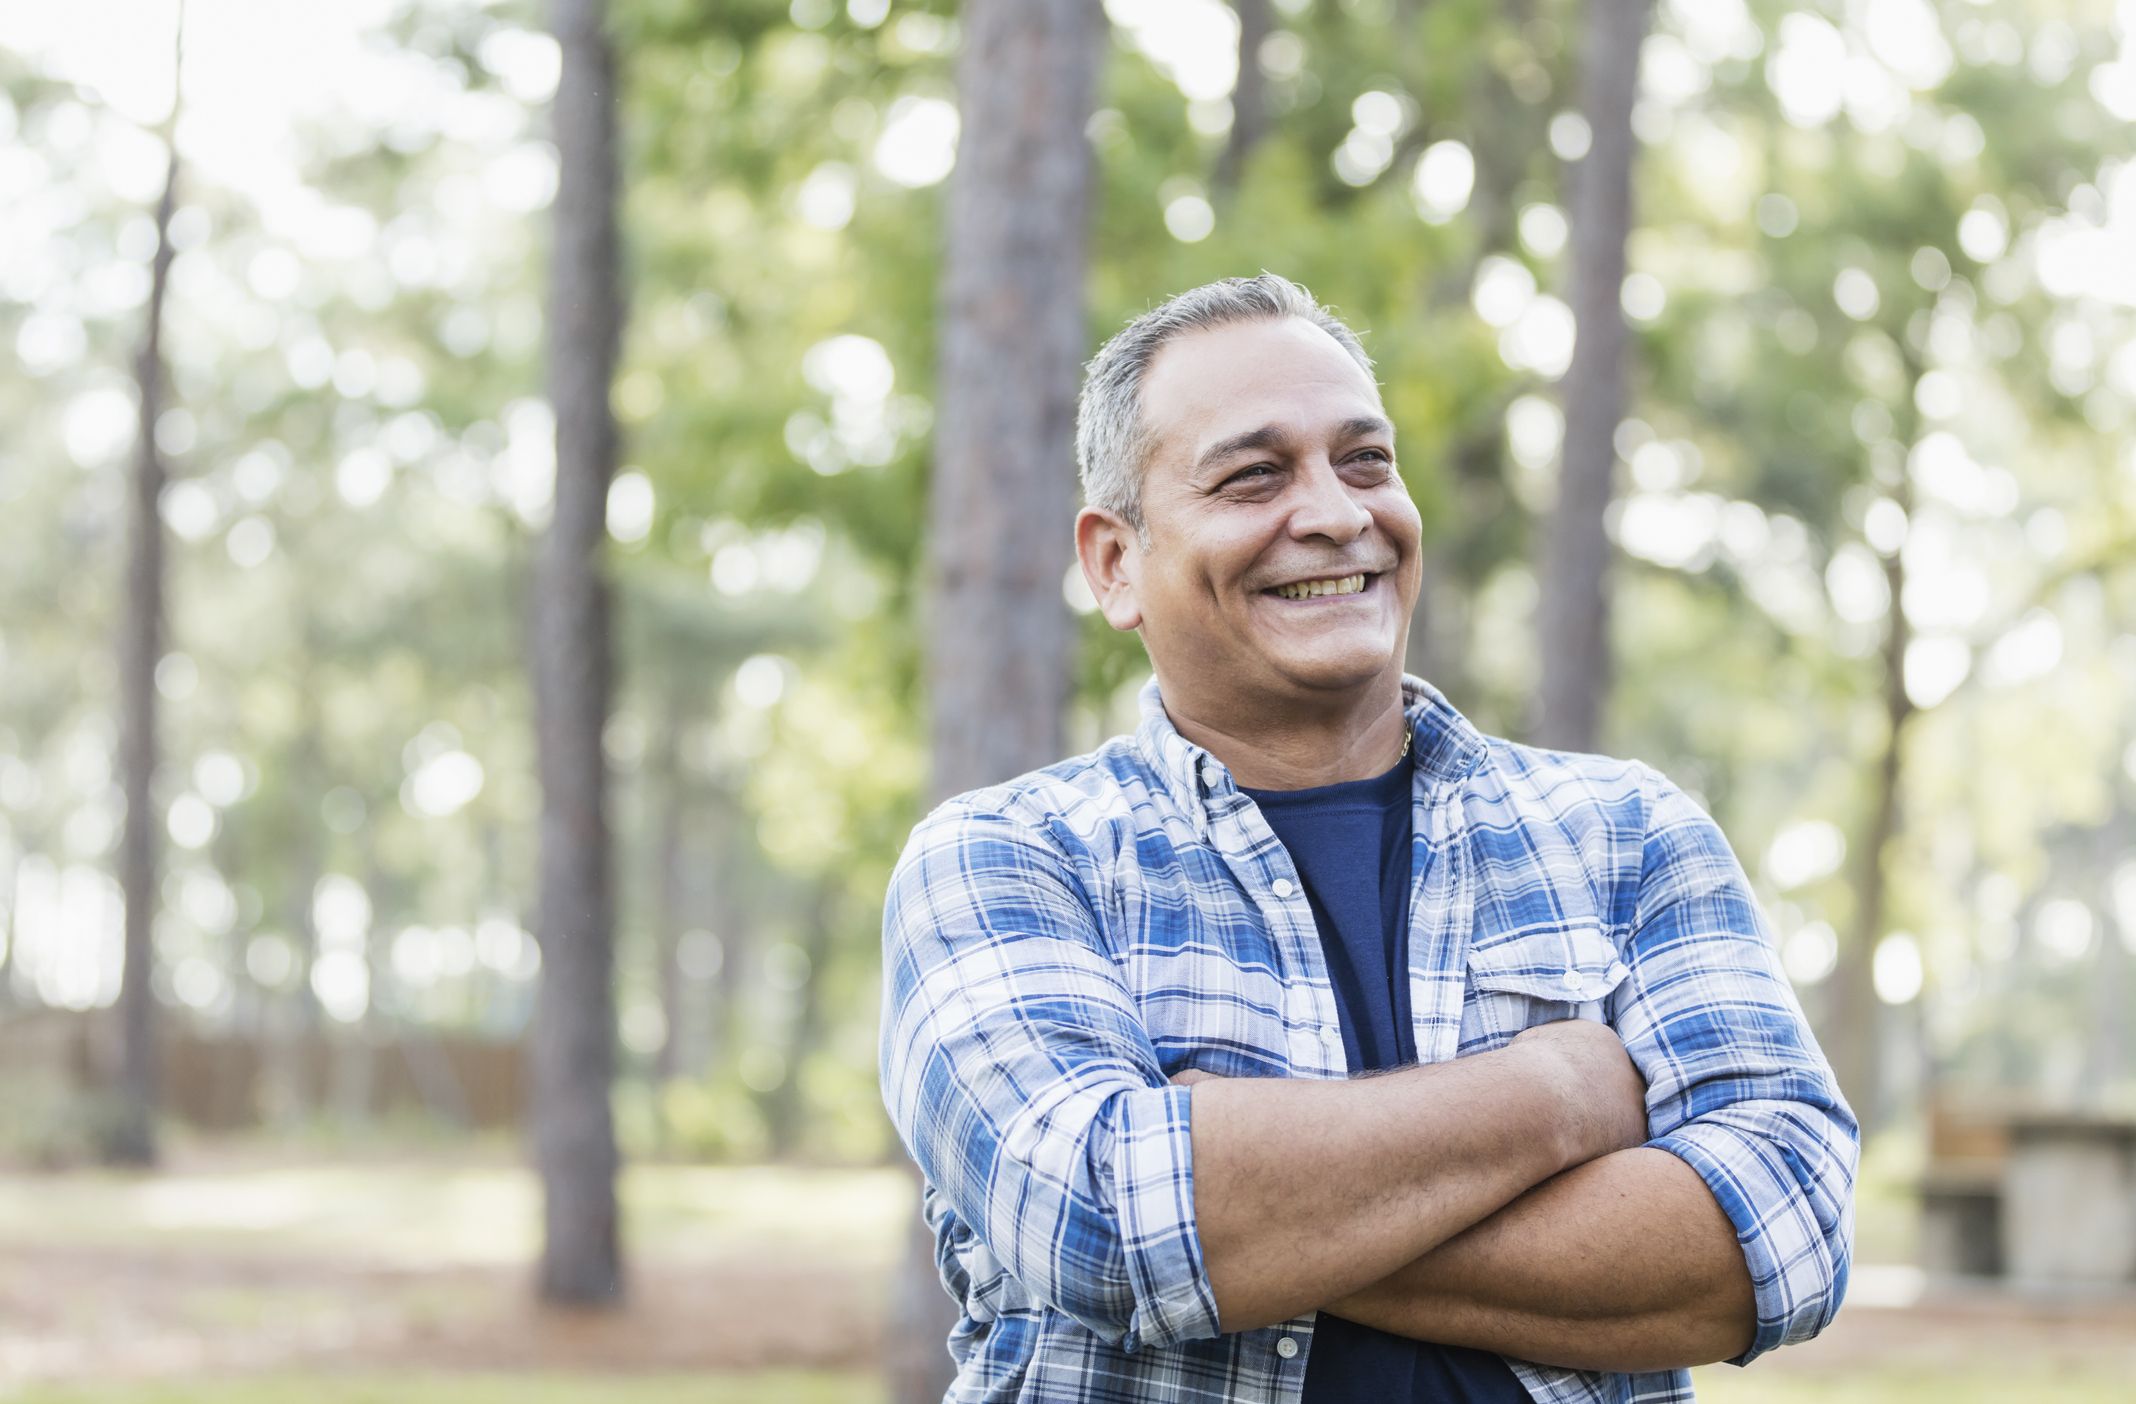 A mature Hispanic man in his 50s wearing a plaid shirt, standing in a park, smiling with his arms crossed.